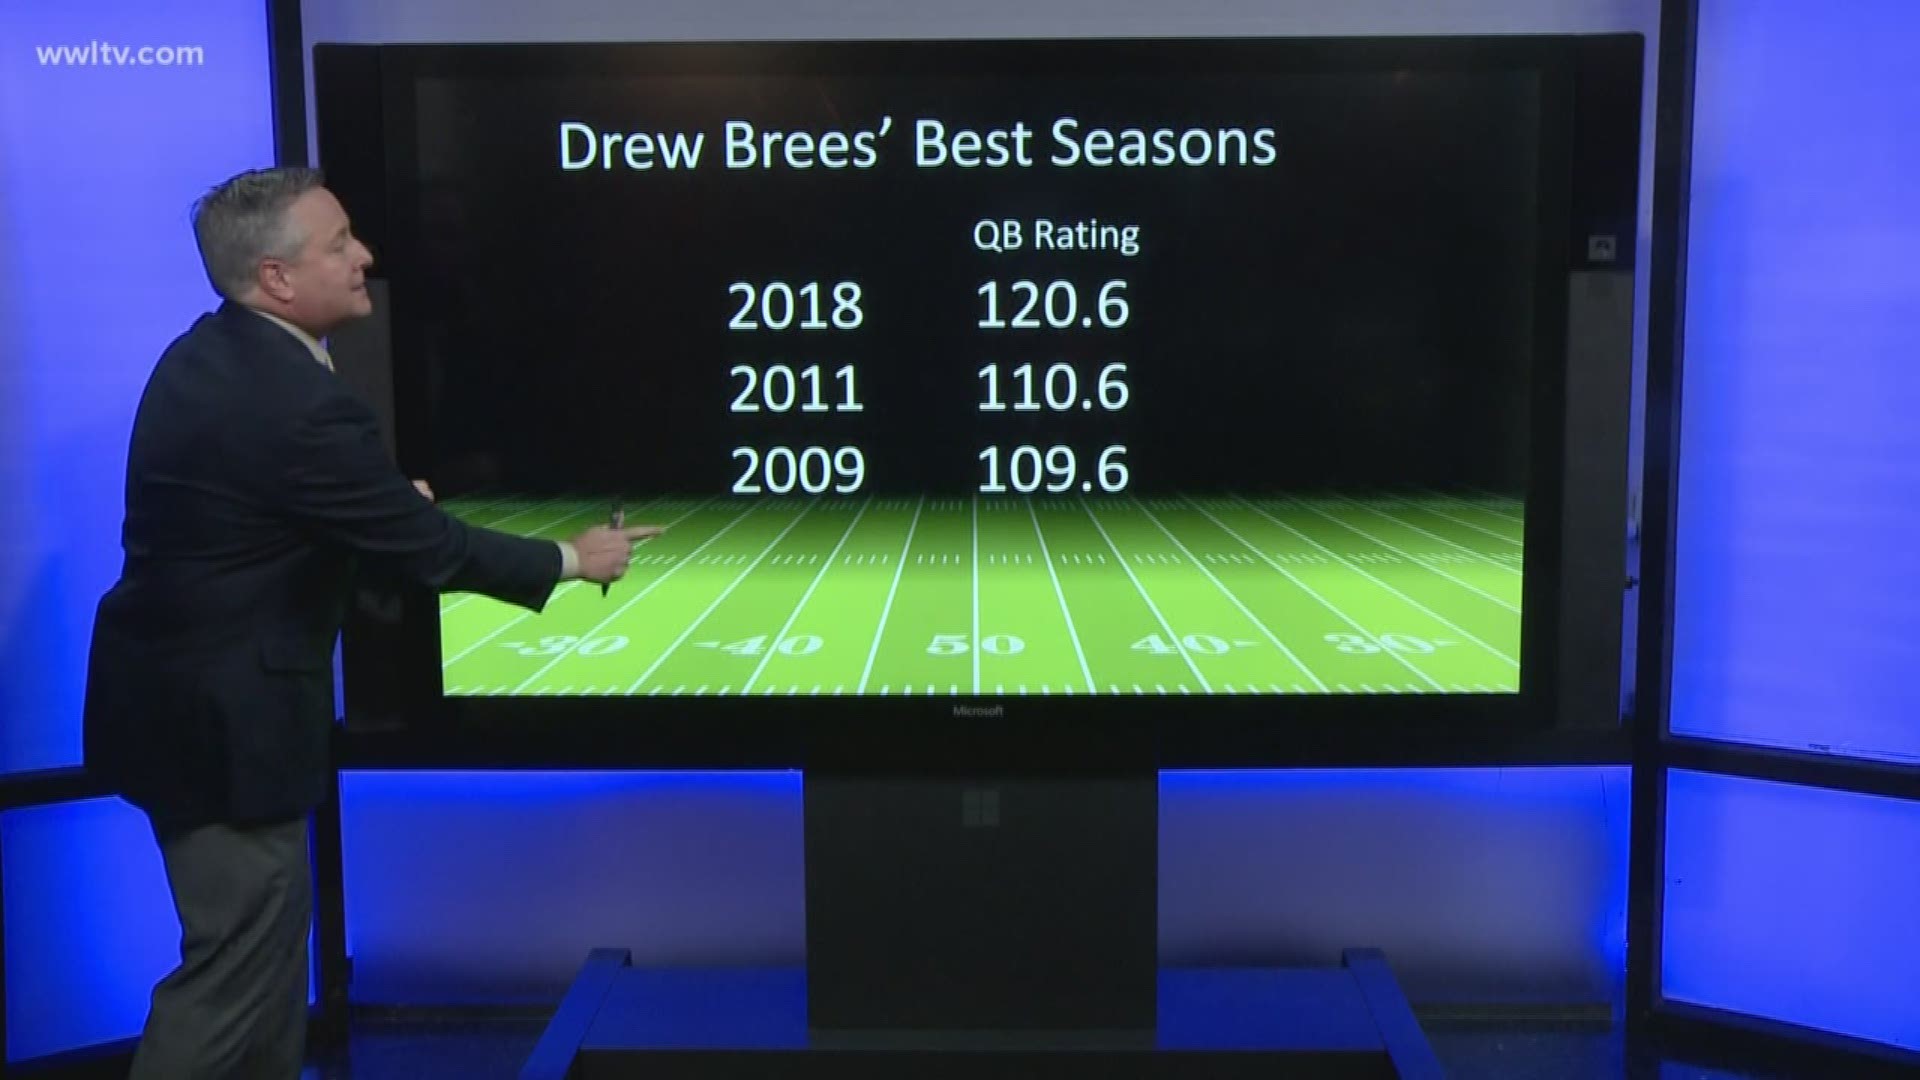 Right now, Drew Brees is not only playing his best football ever, he's playing better than any QB in the NFL in the last seven years.